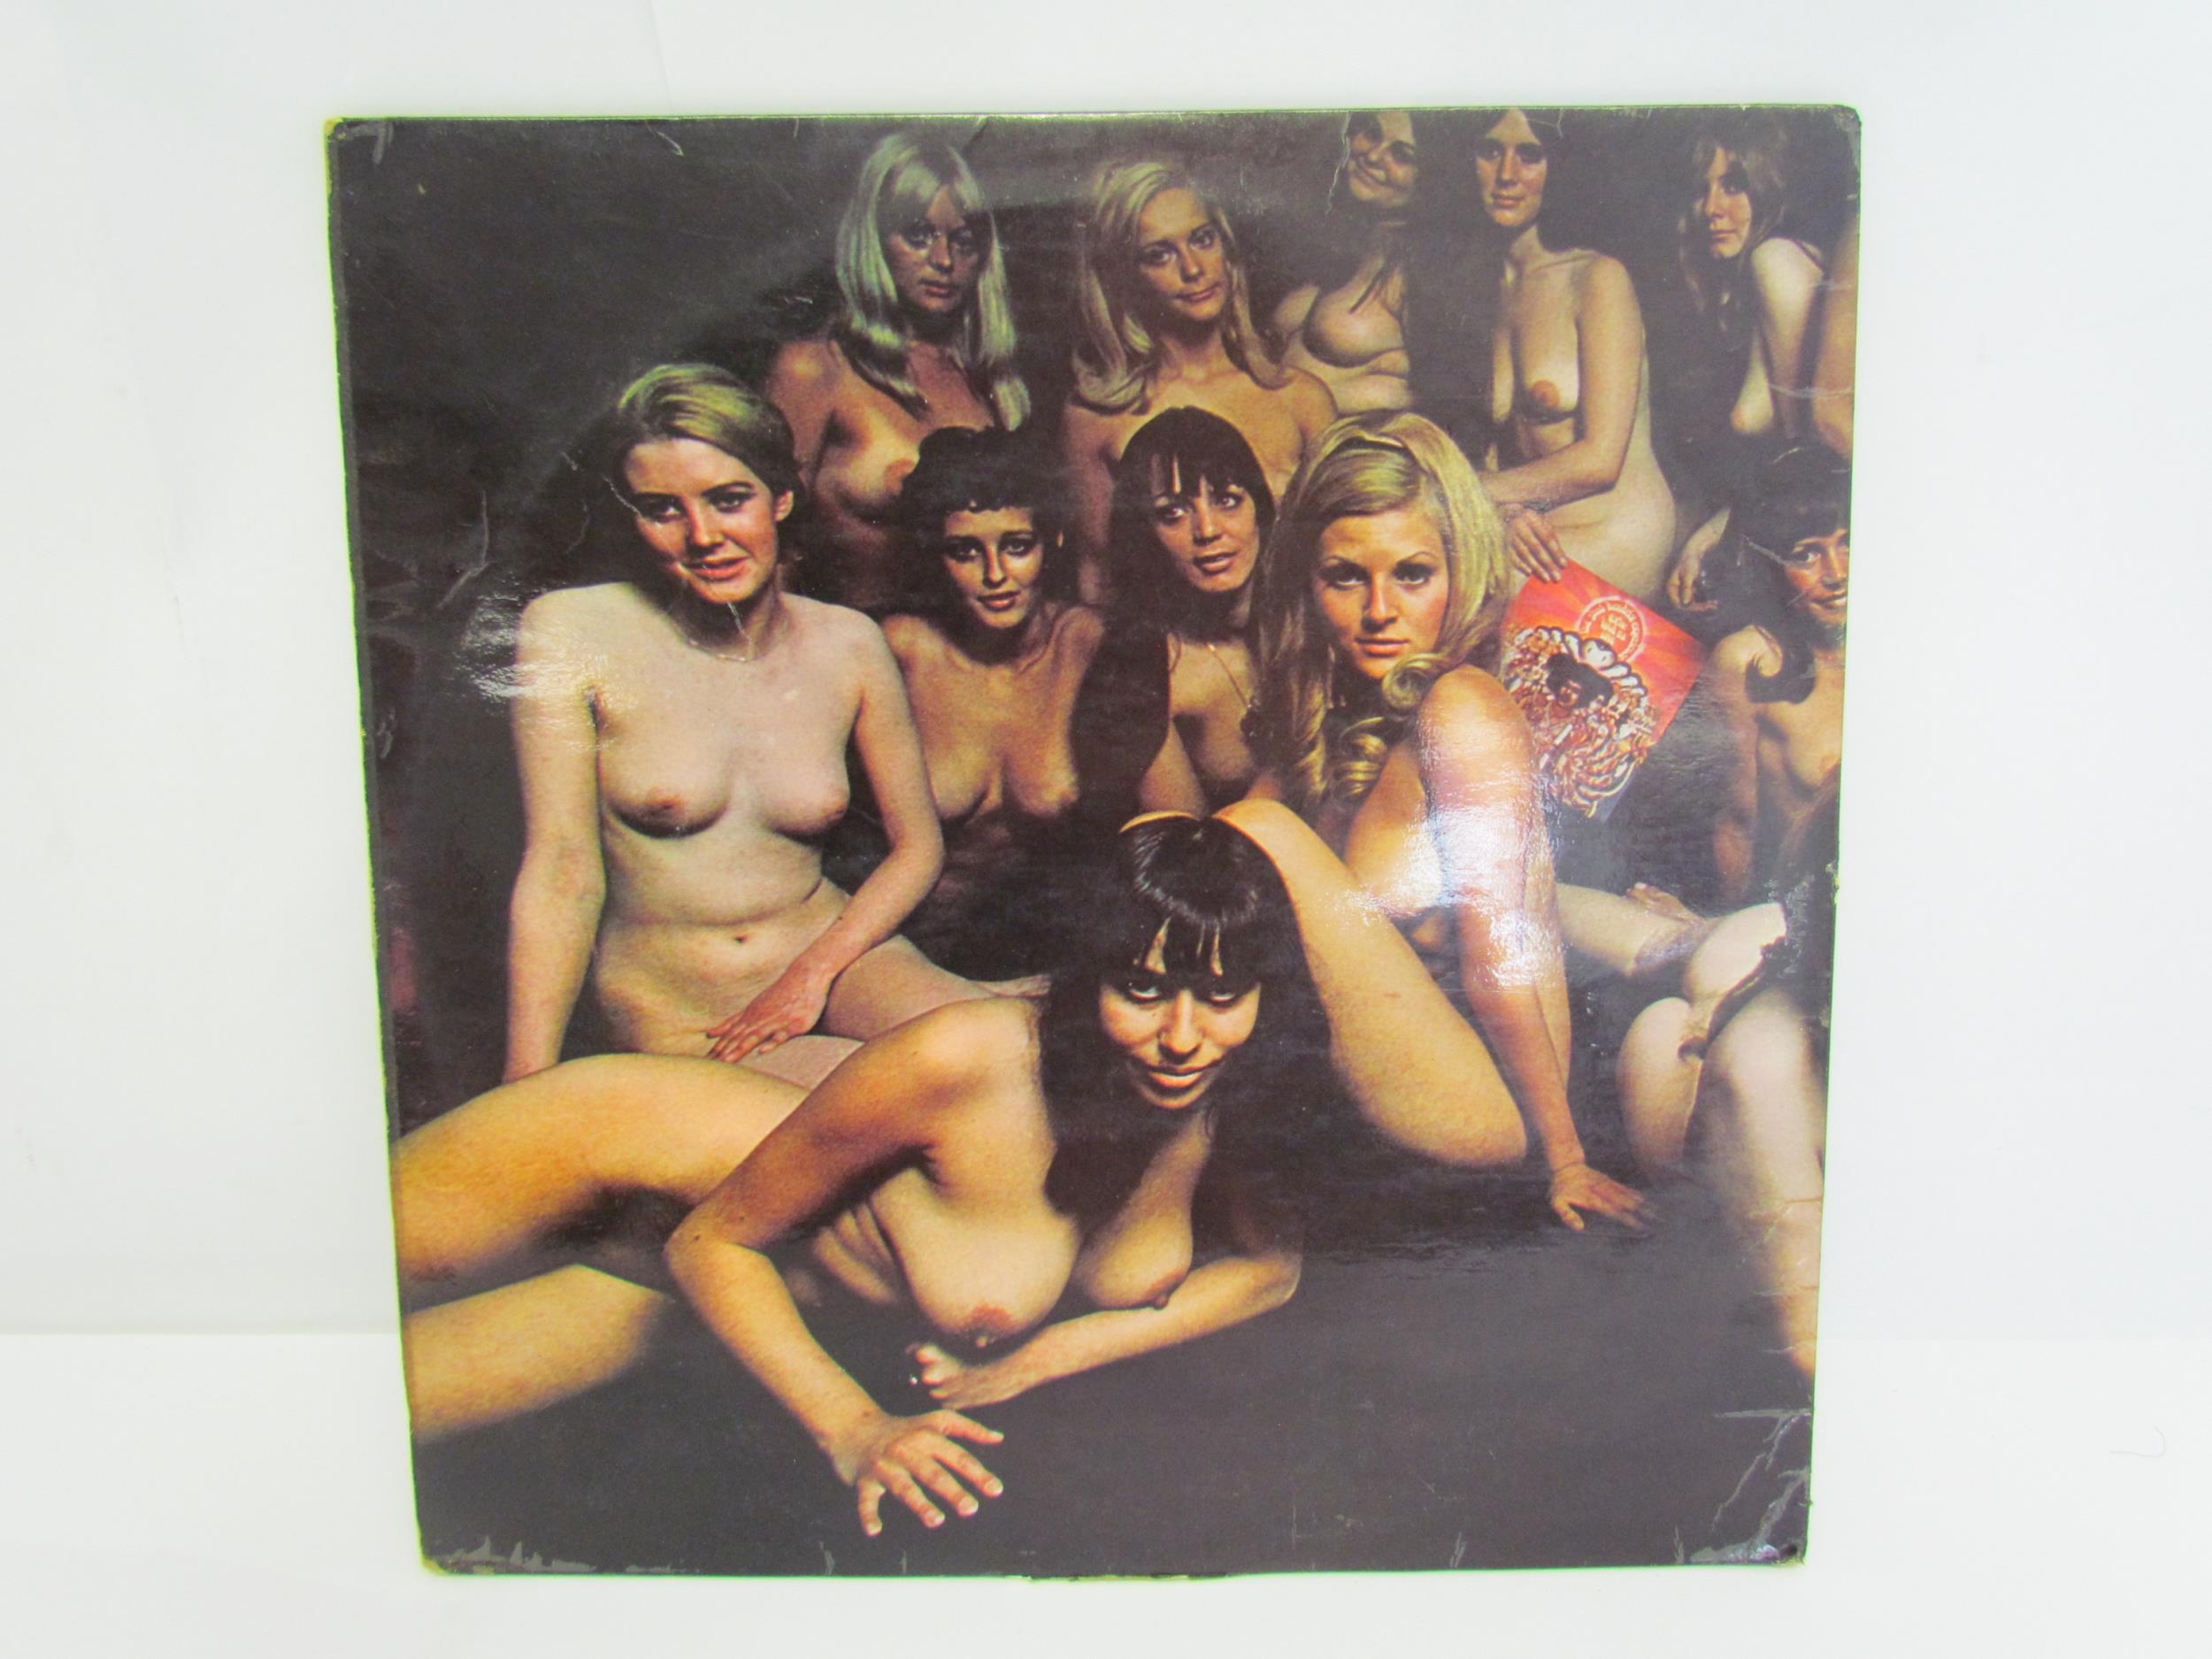 THE JIMI HENDRIX EXPERIENCE: 'Electric Ladyland' double LP, original UK pressing on Track Record, - Image 2 of 9